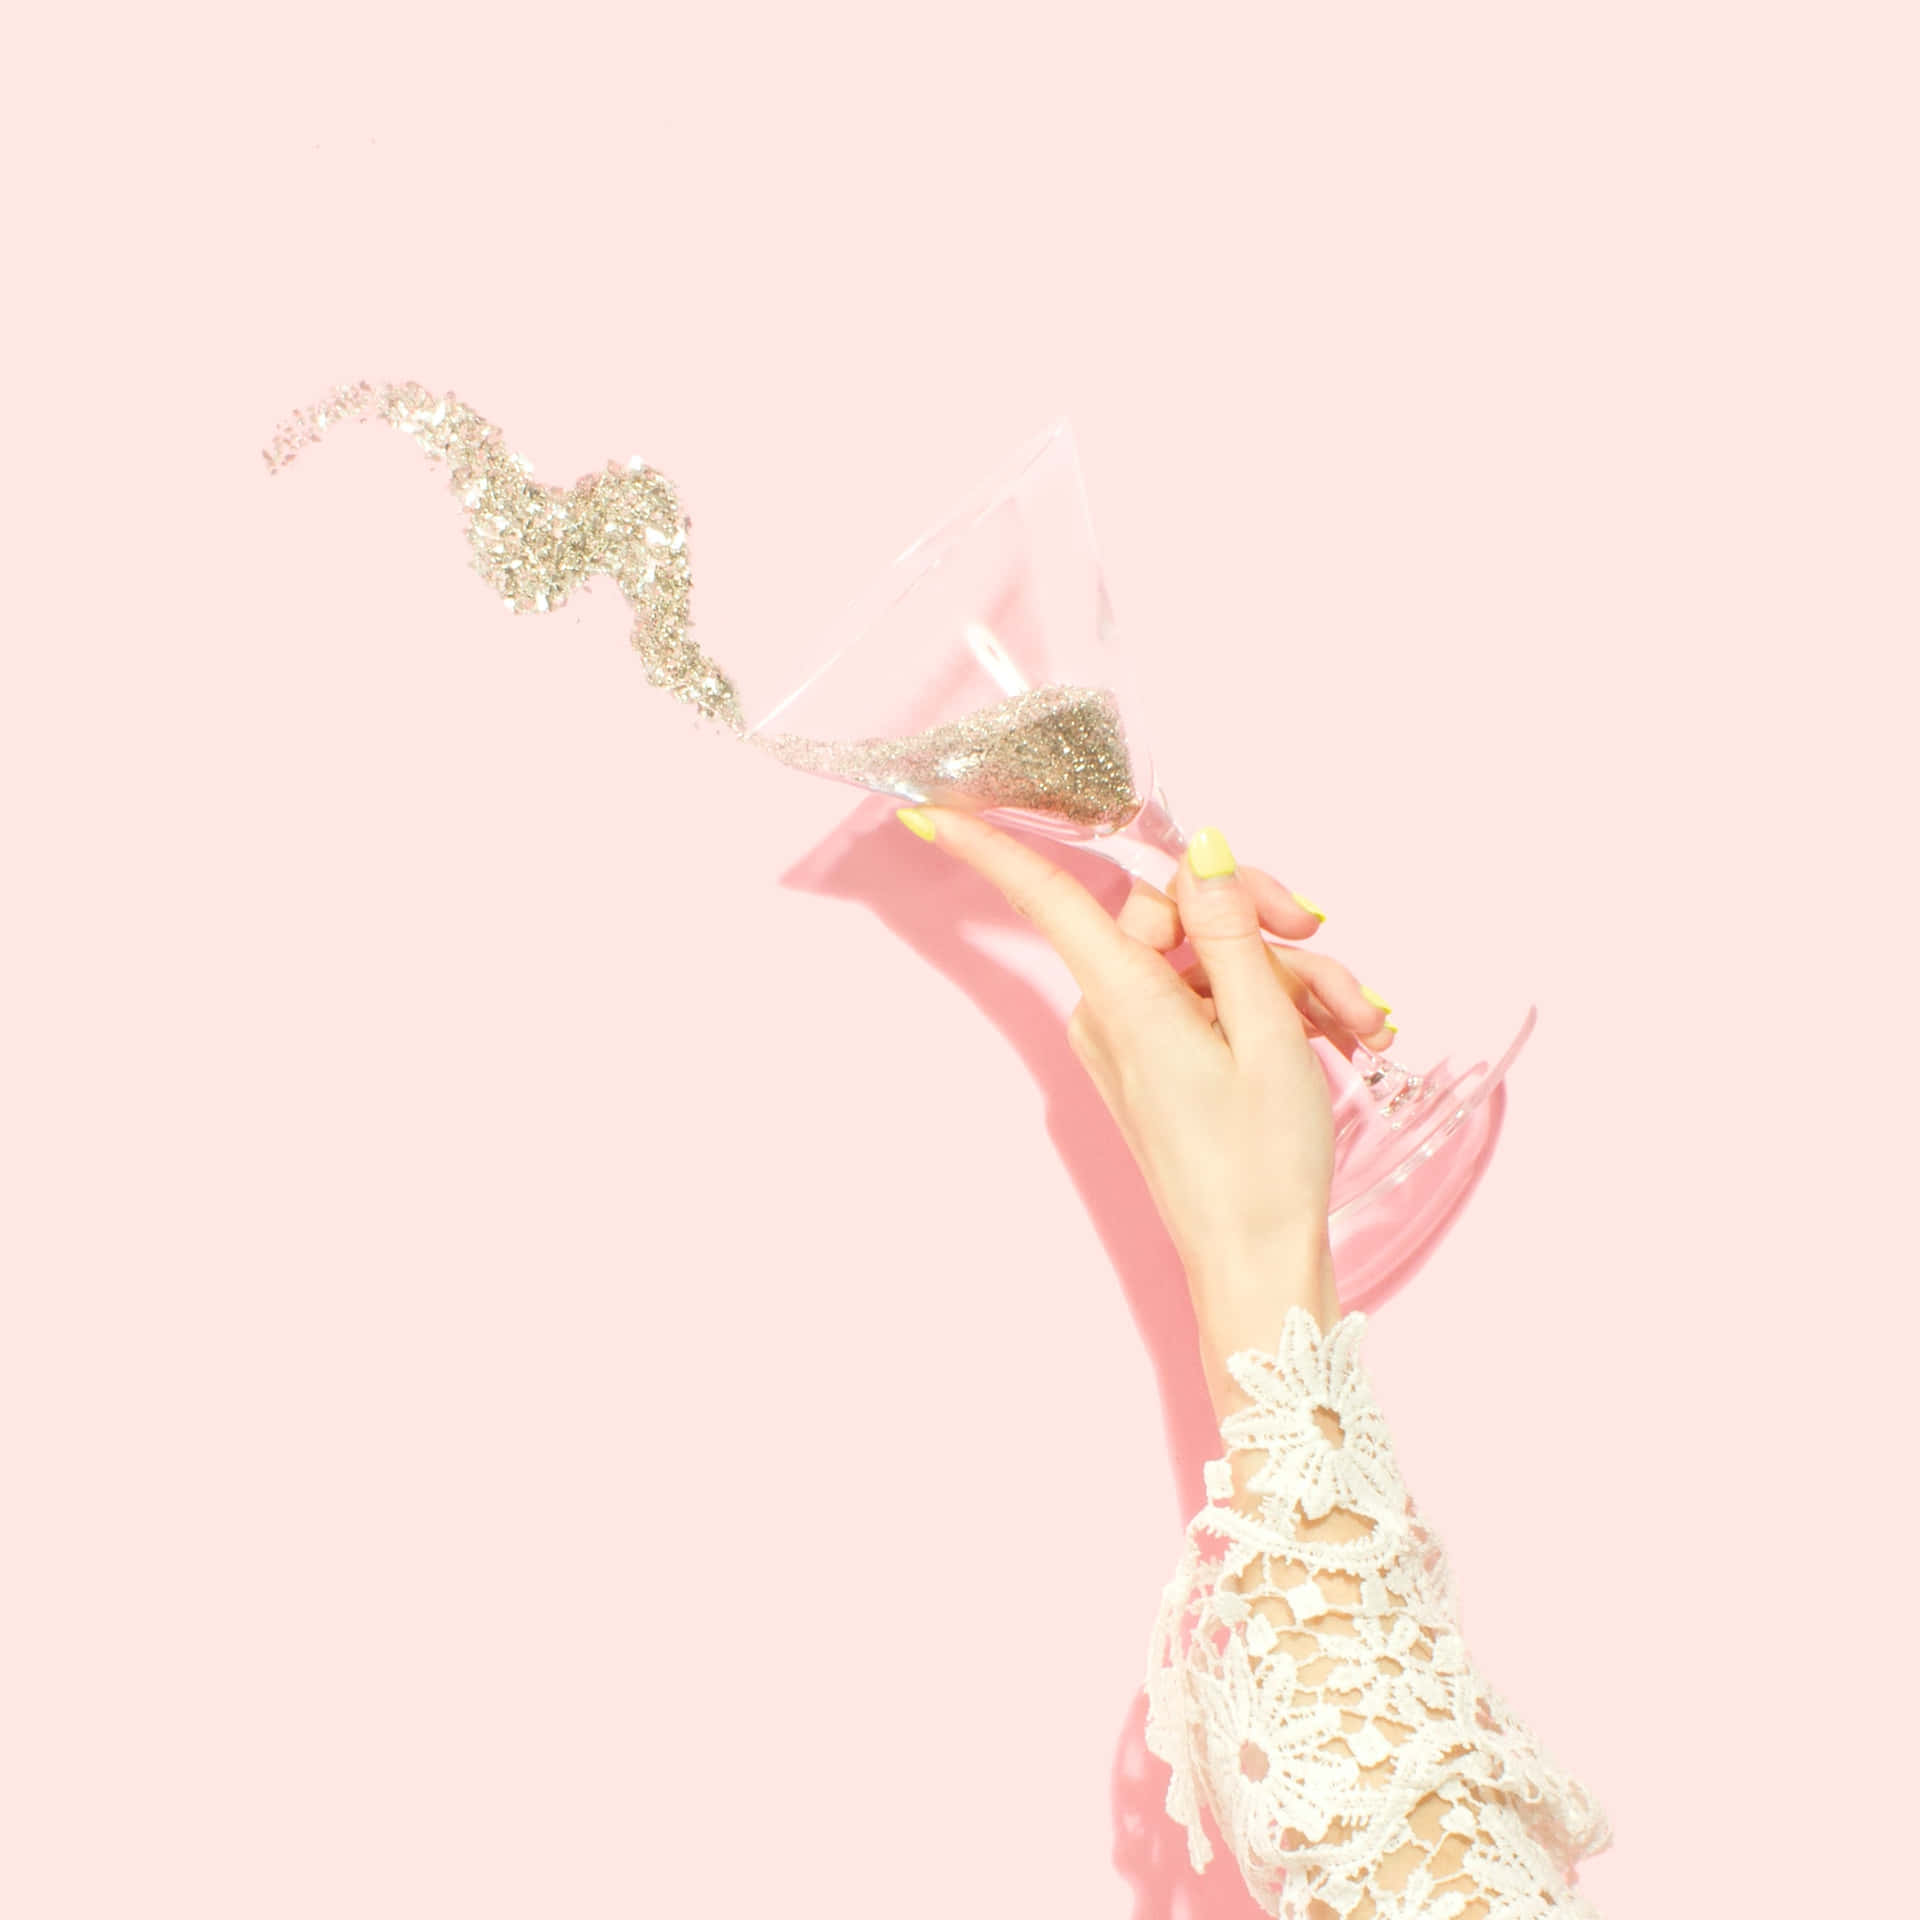 A Woman's Hand Holding A Glass Of Champagne Wallpaper